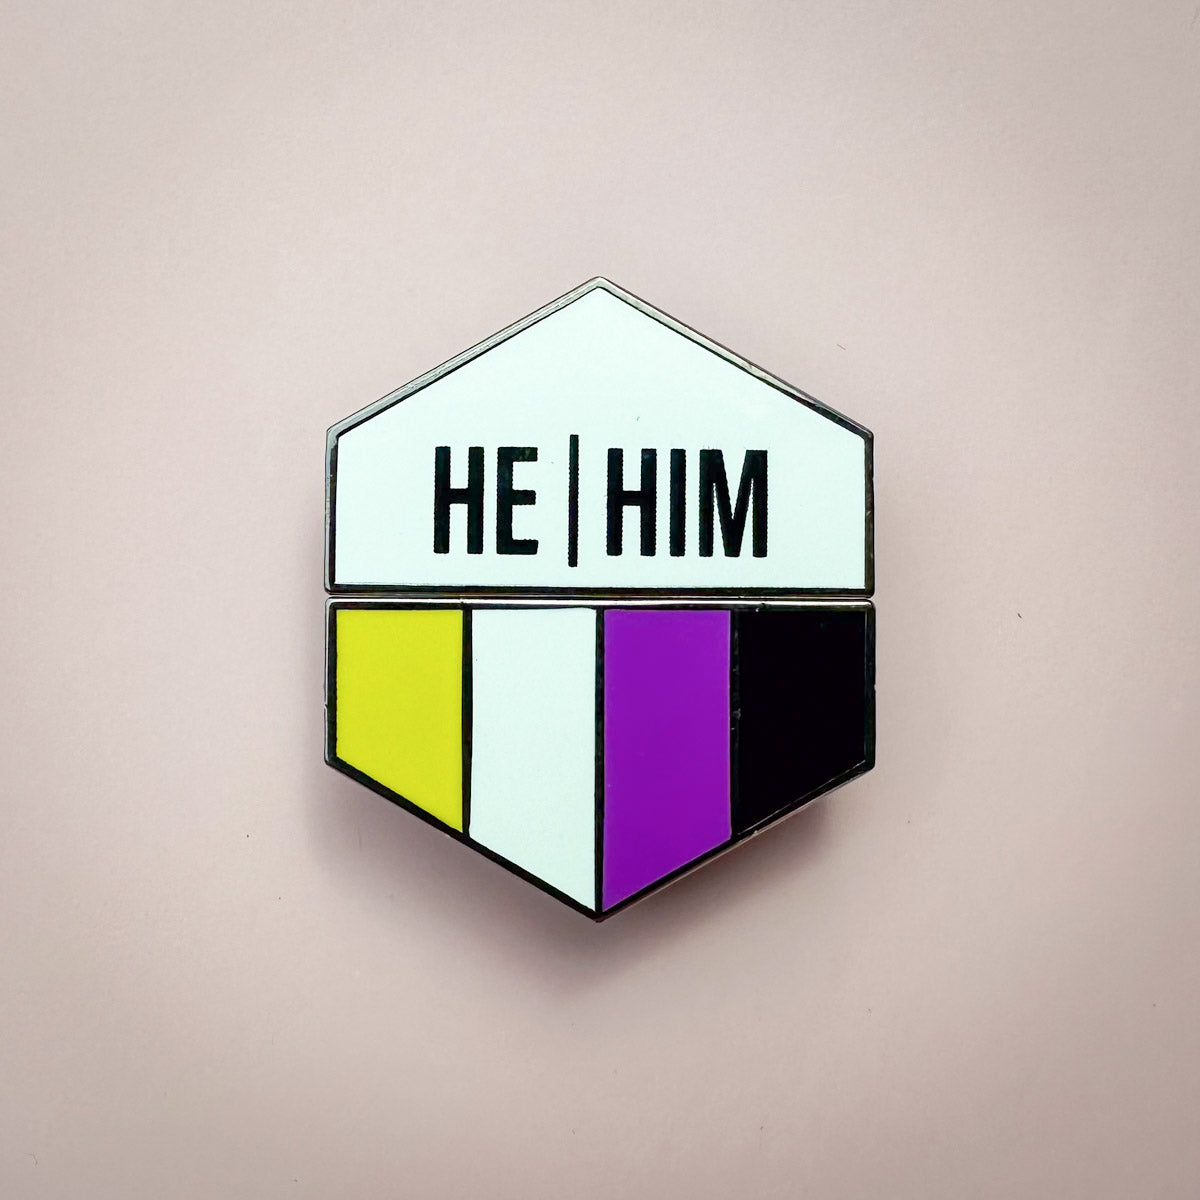 Flags For Good Pronoun + Pride Flag Magnetic Pin | He Him + Nonbinary Flag Combo